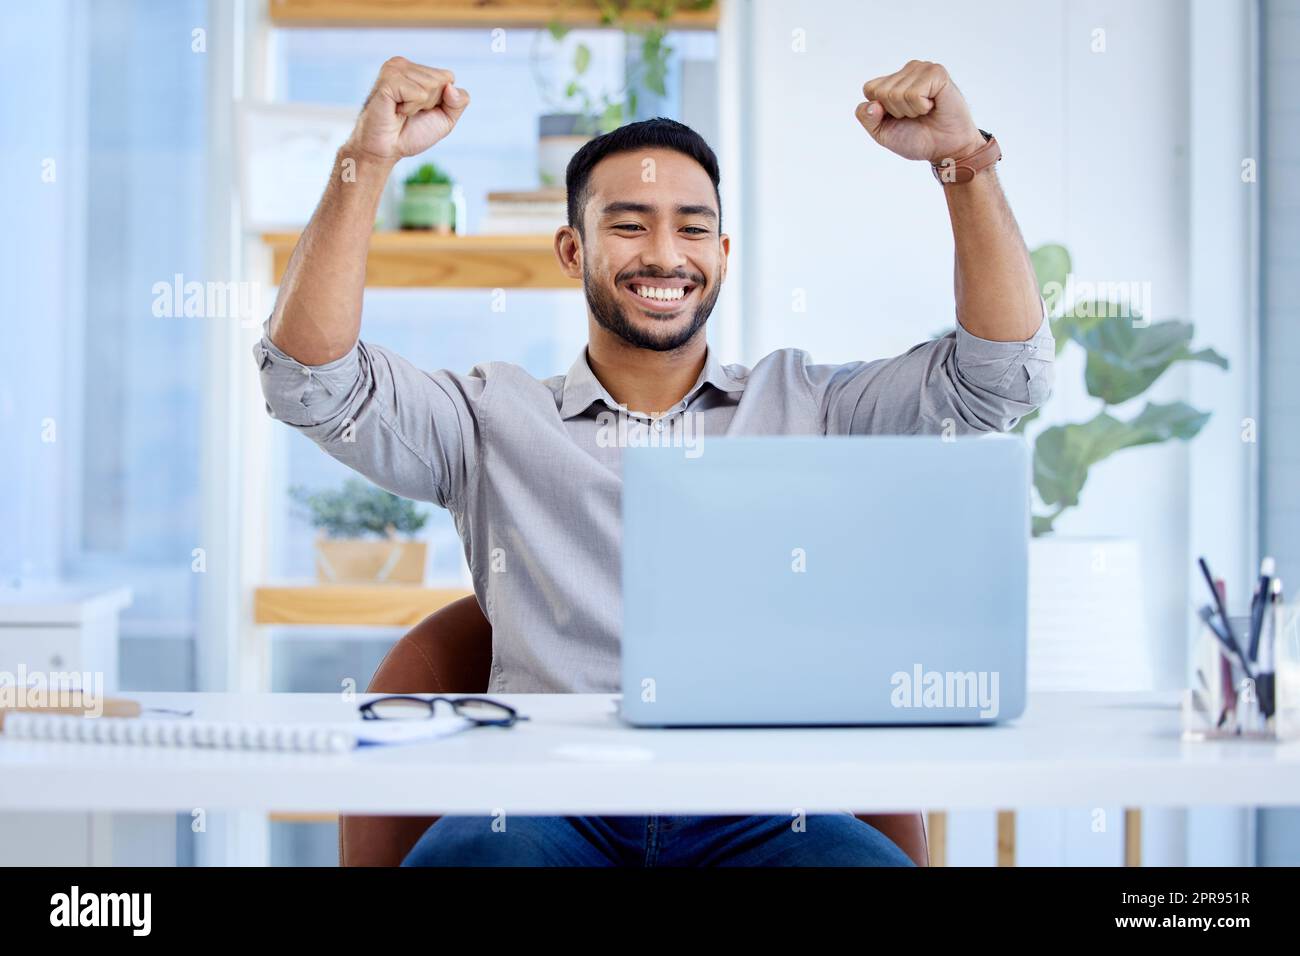 This win will be big for my business. a young businessman cheering while working on a laptop in an office. Stock Photo